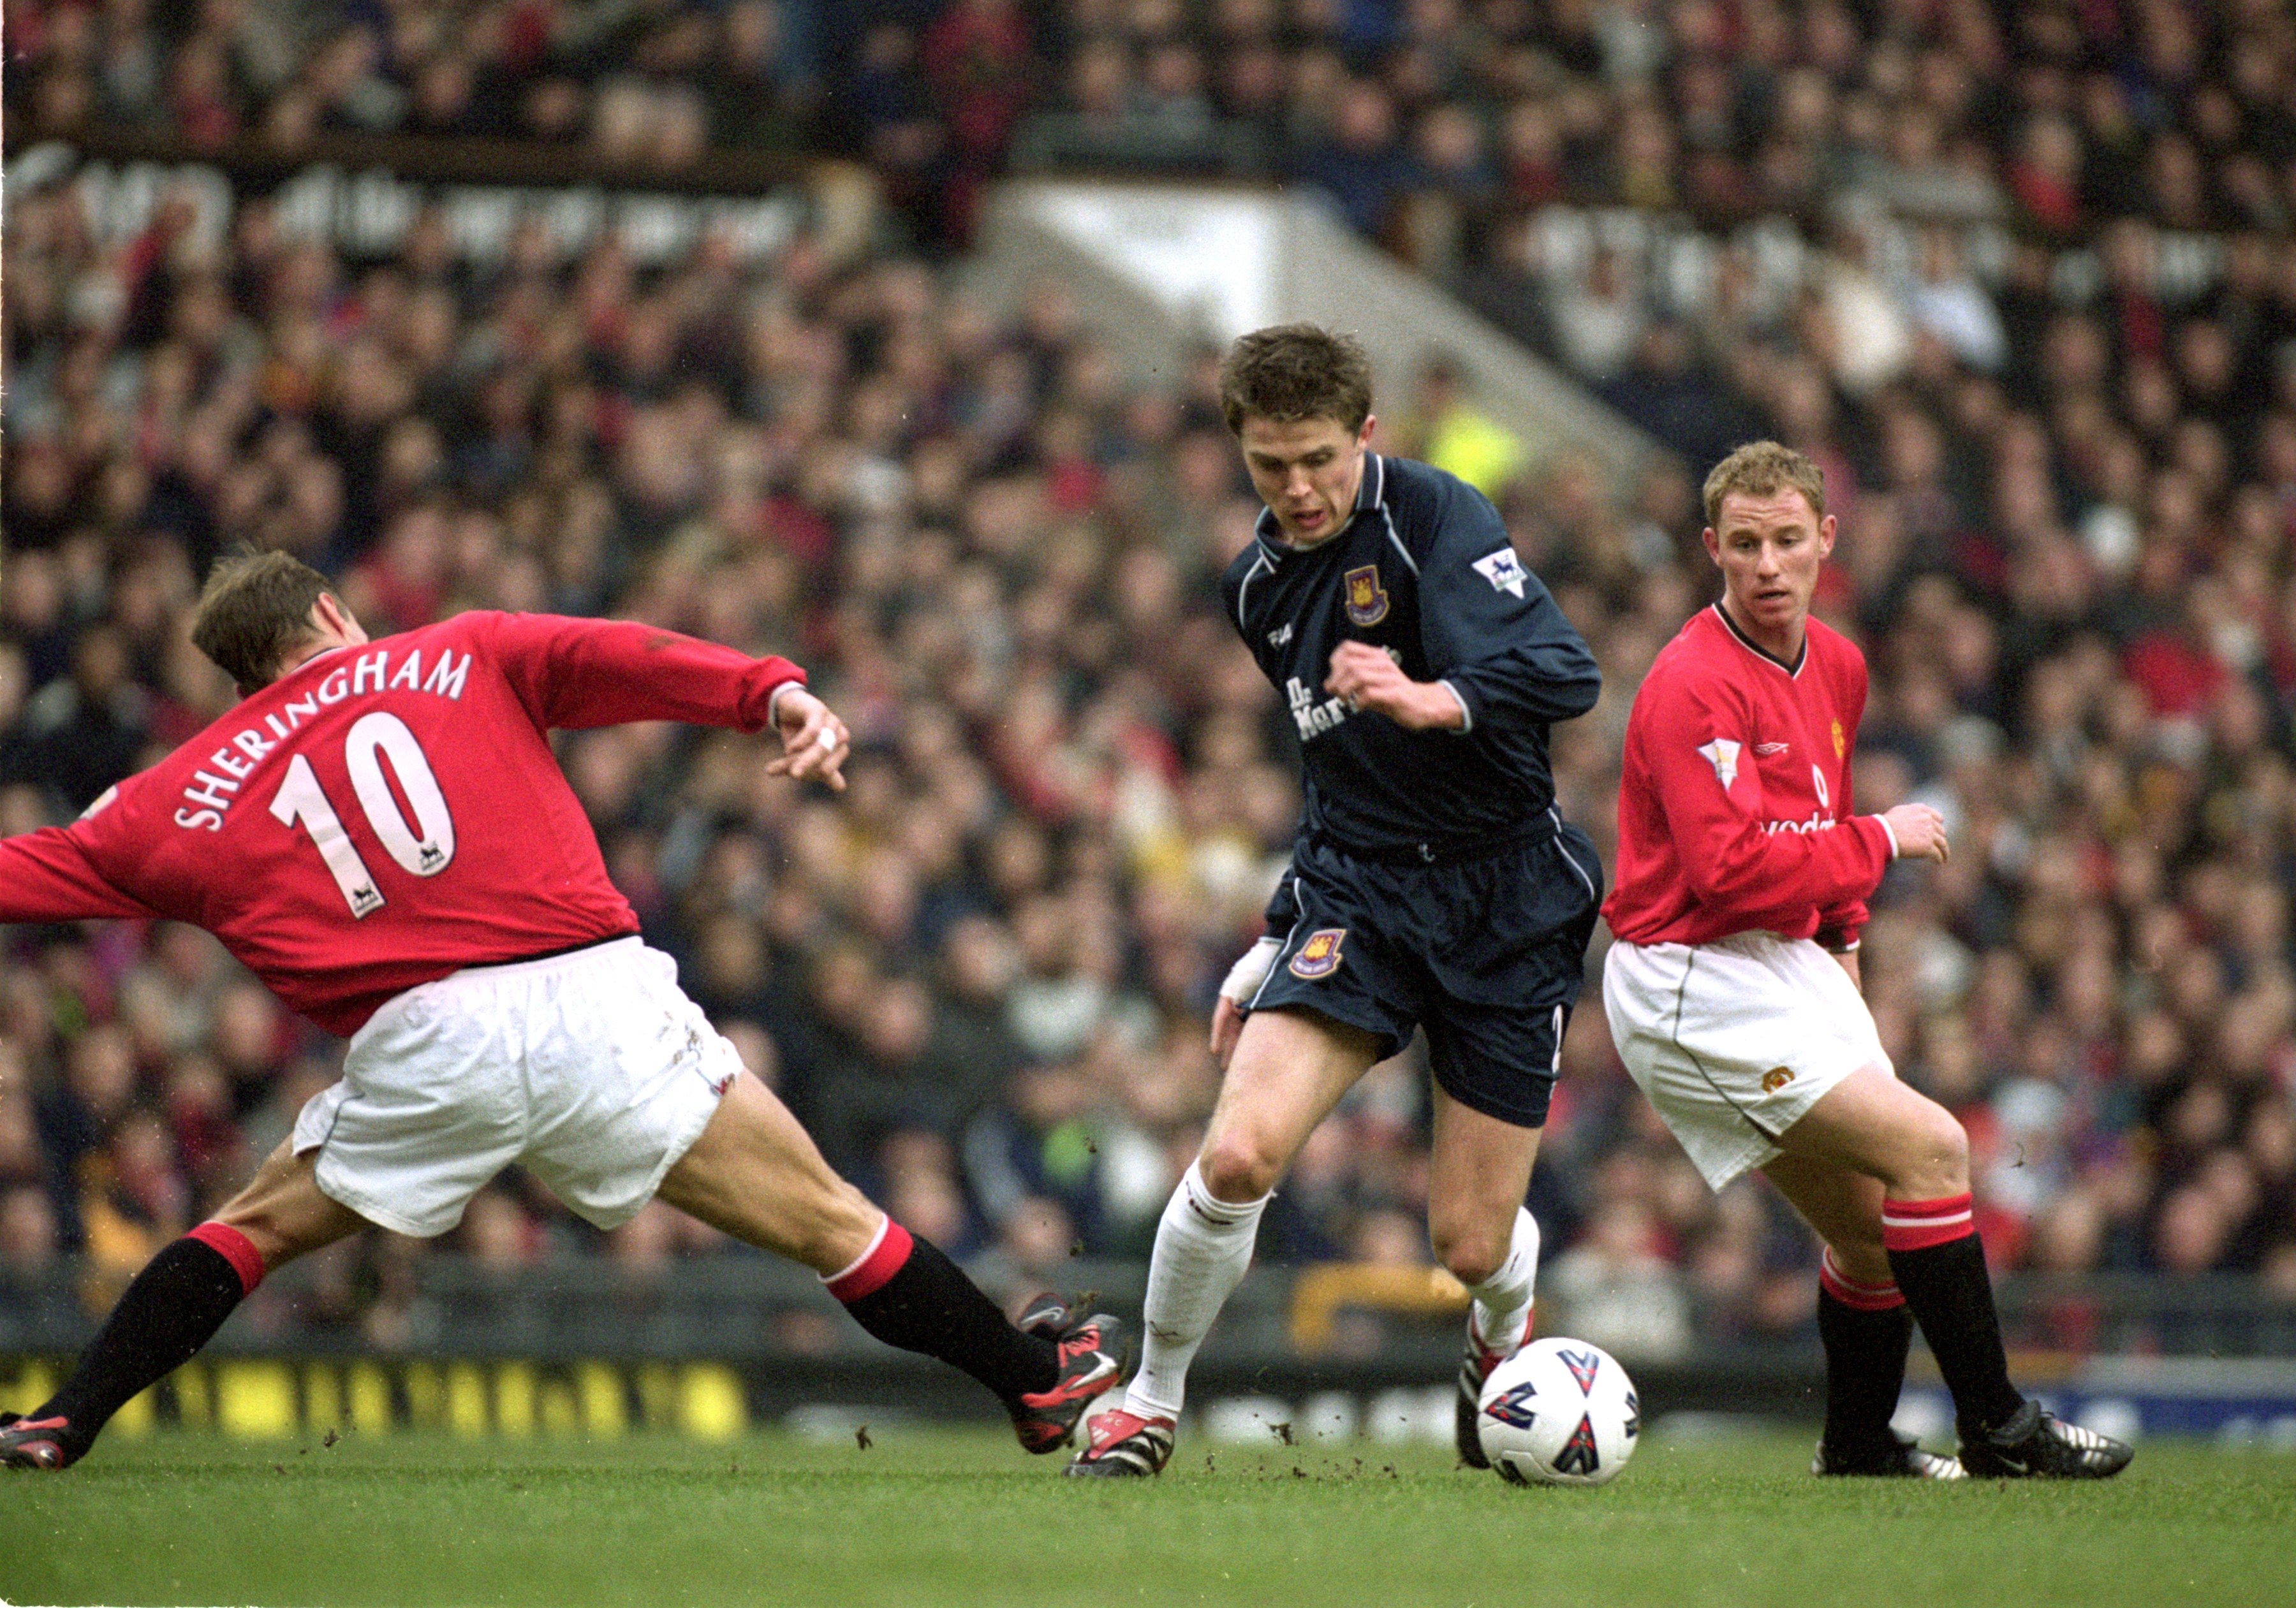 Michael Carrick on the ball for West Ham against Manchester United in the FA Cup in January 2001.